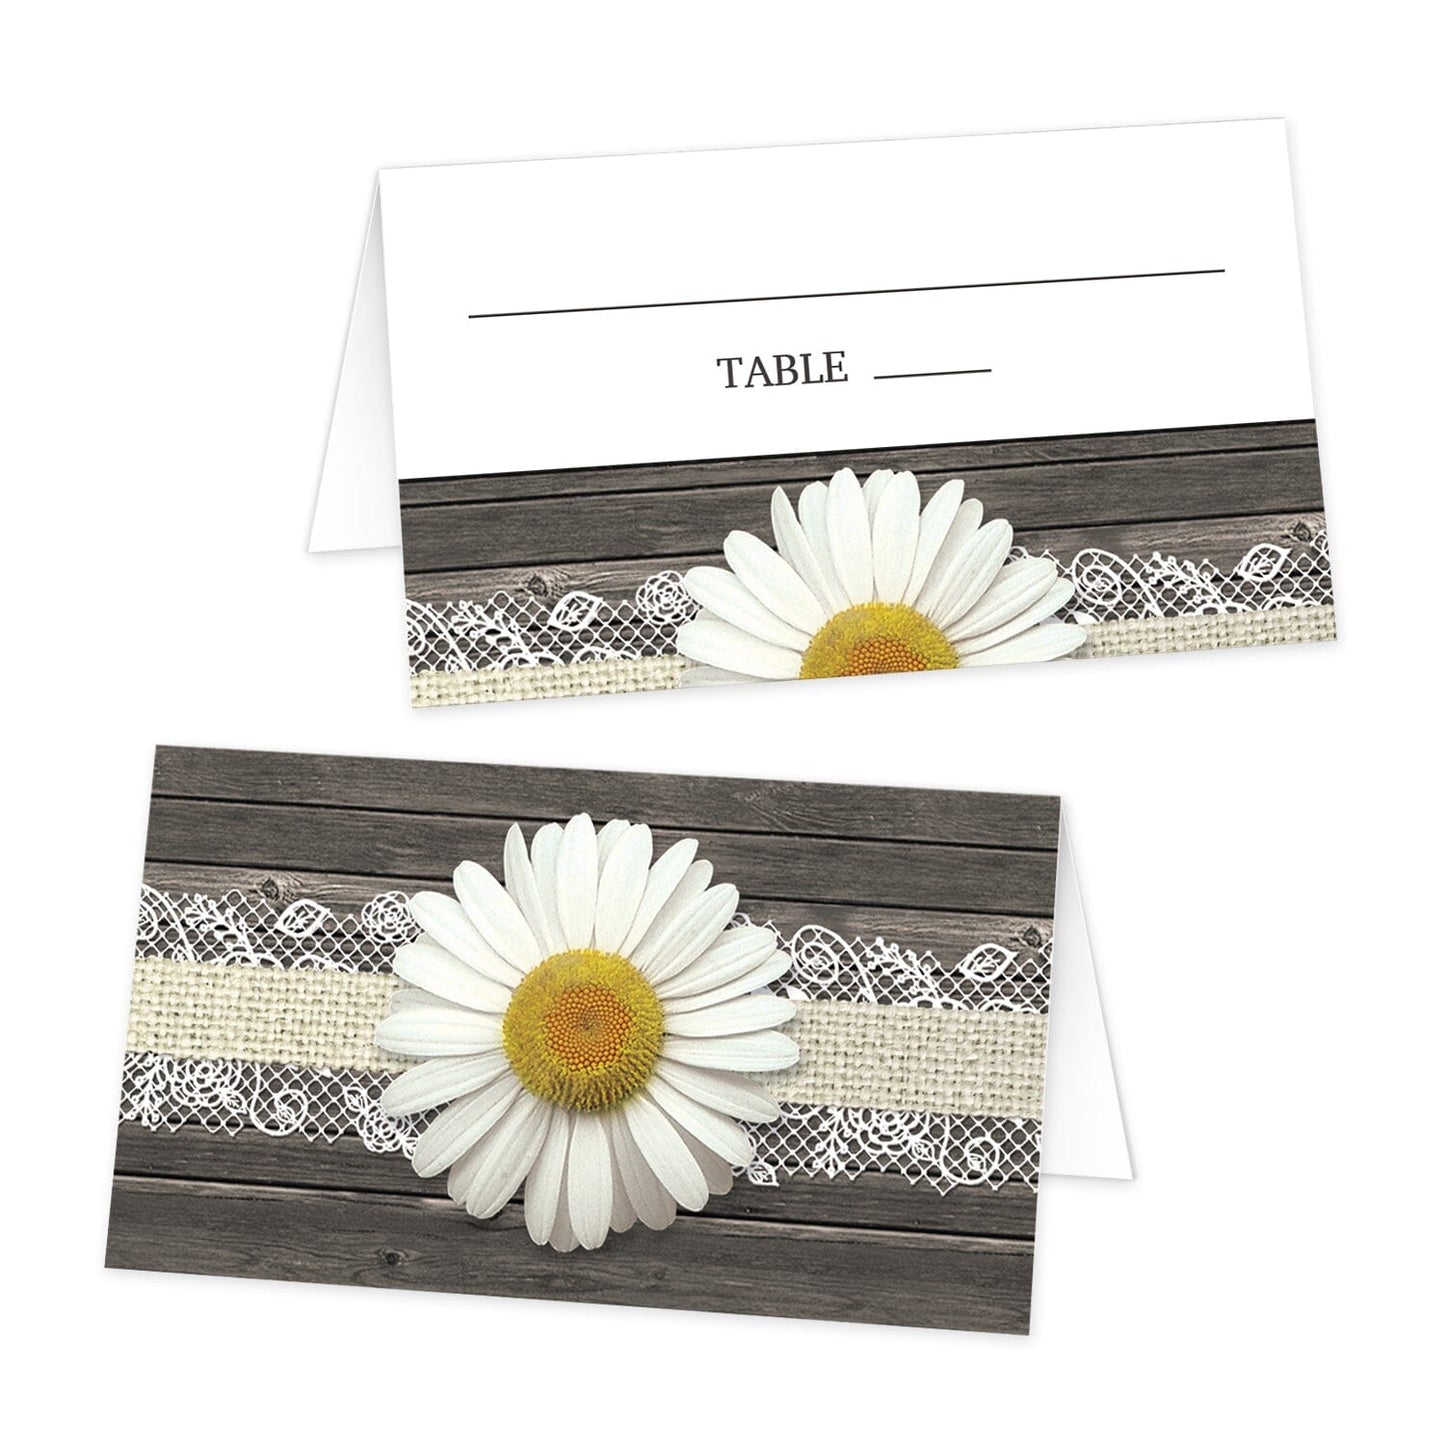 Daisy Burlap and Lace Wood Folded Place Cards at Artistically Invited. Southern rustic daisy burlap and lace wood folded place cards with a white daisy flower centered on one side on a burlap and lace ribbon strip illustration over a brown country wood background. Your lines for writing the guest's name and table number are on the other side of the folded cards in a white space above the same daisy illustration that runs along the bottom.